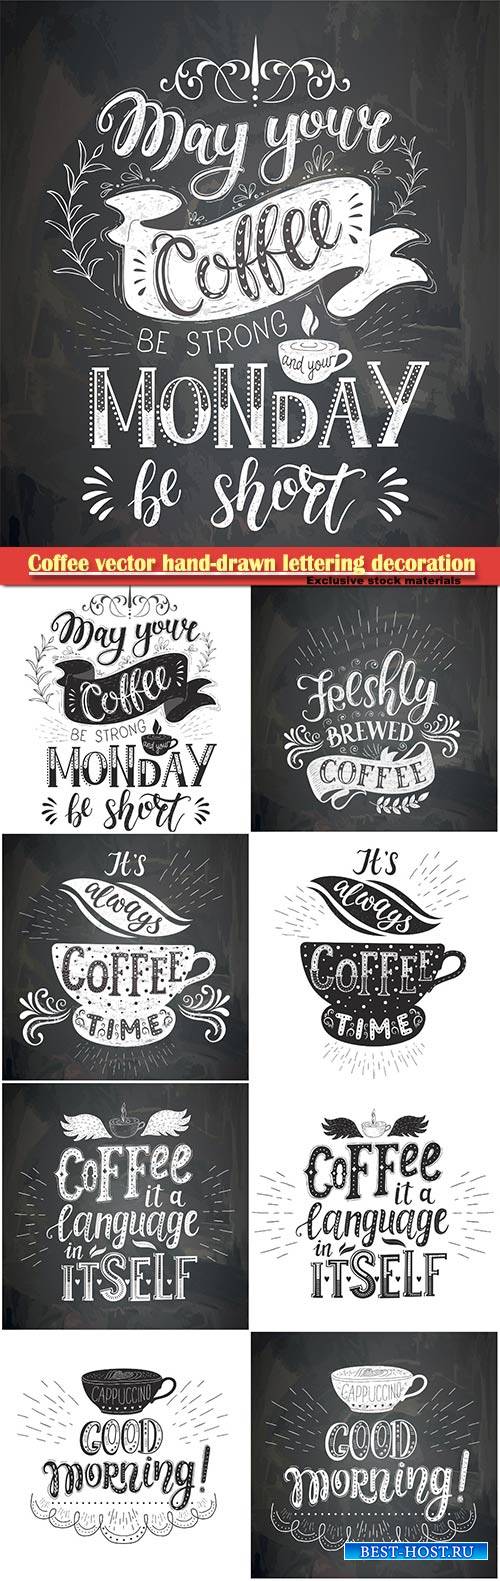 Coffee vector hand-drawn lettering decoration for restaurant and bar